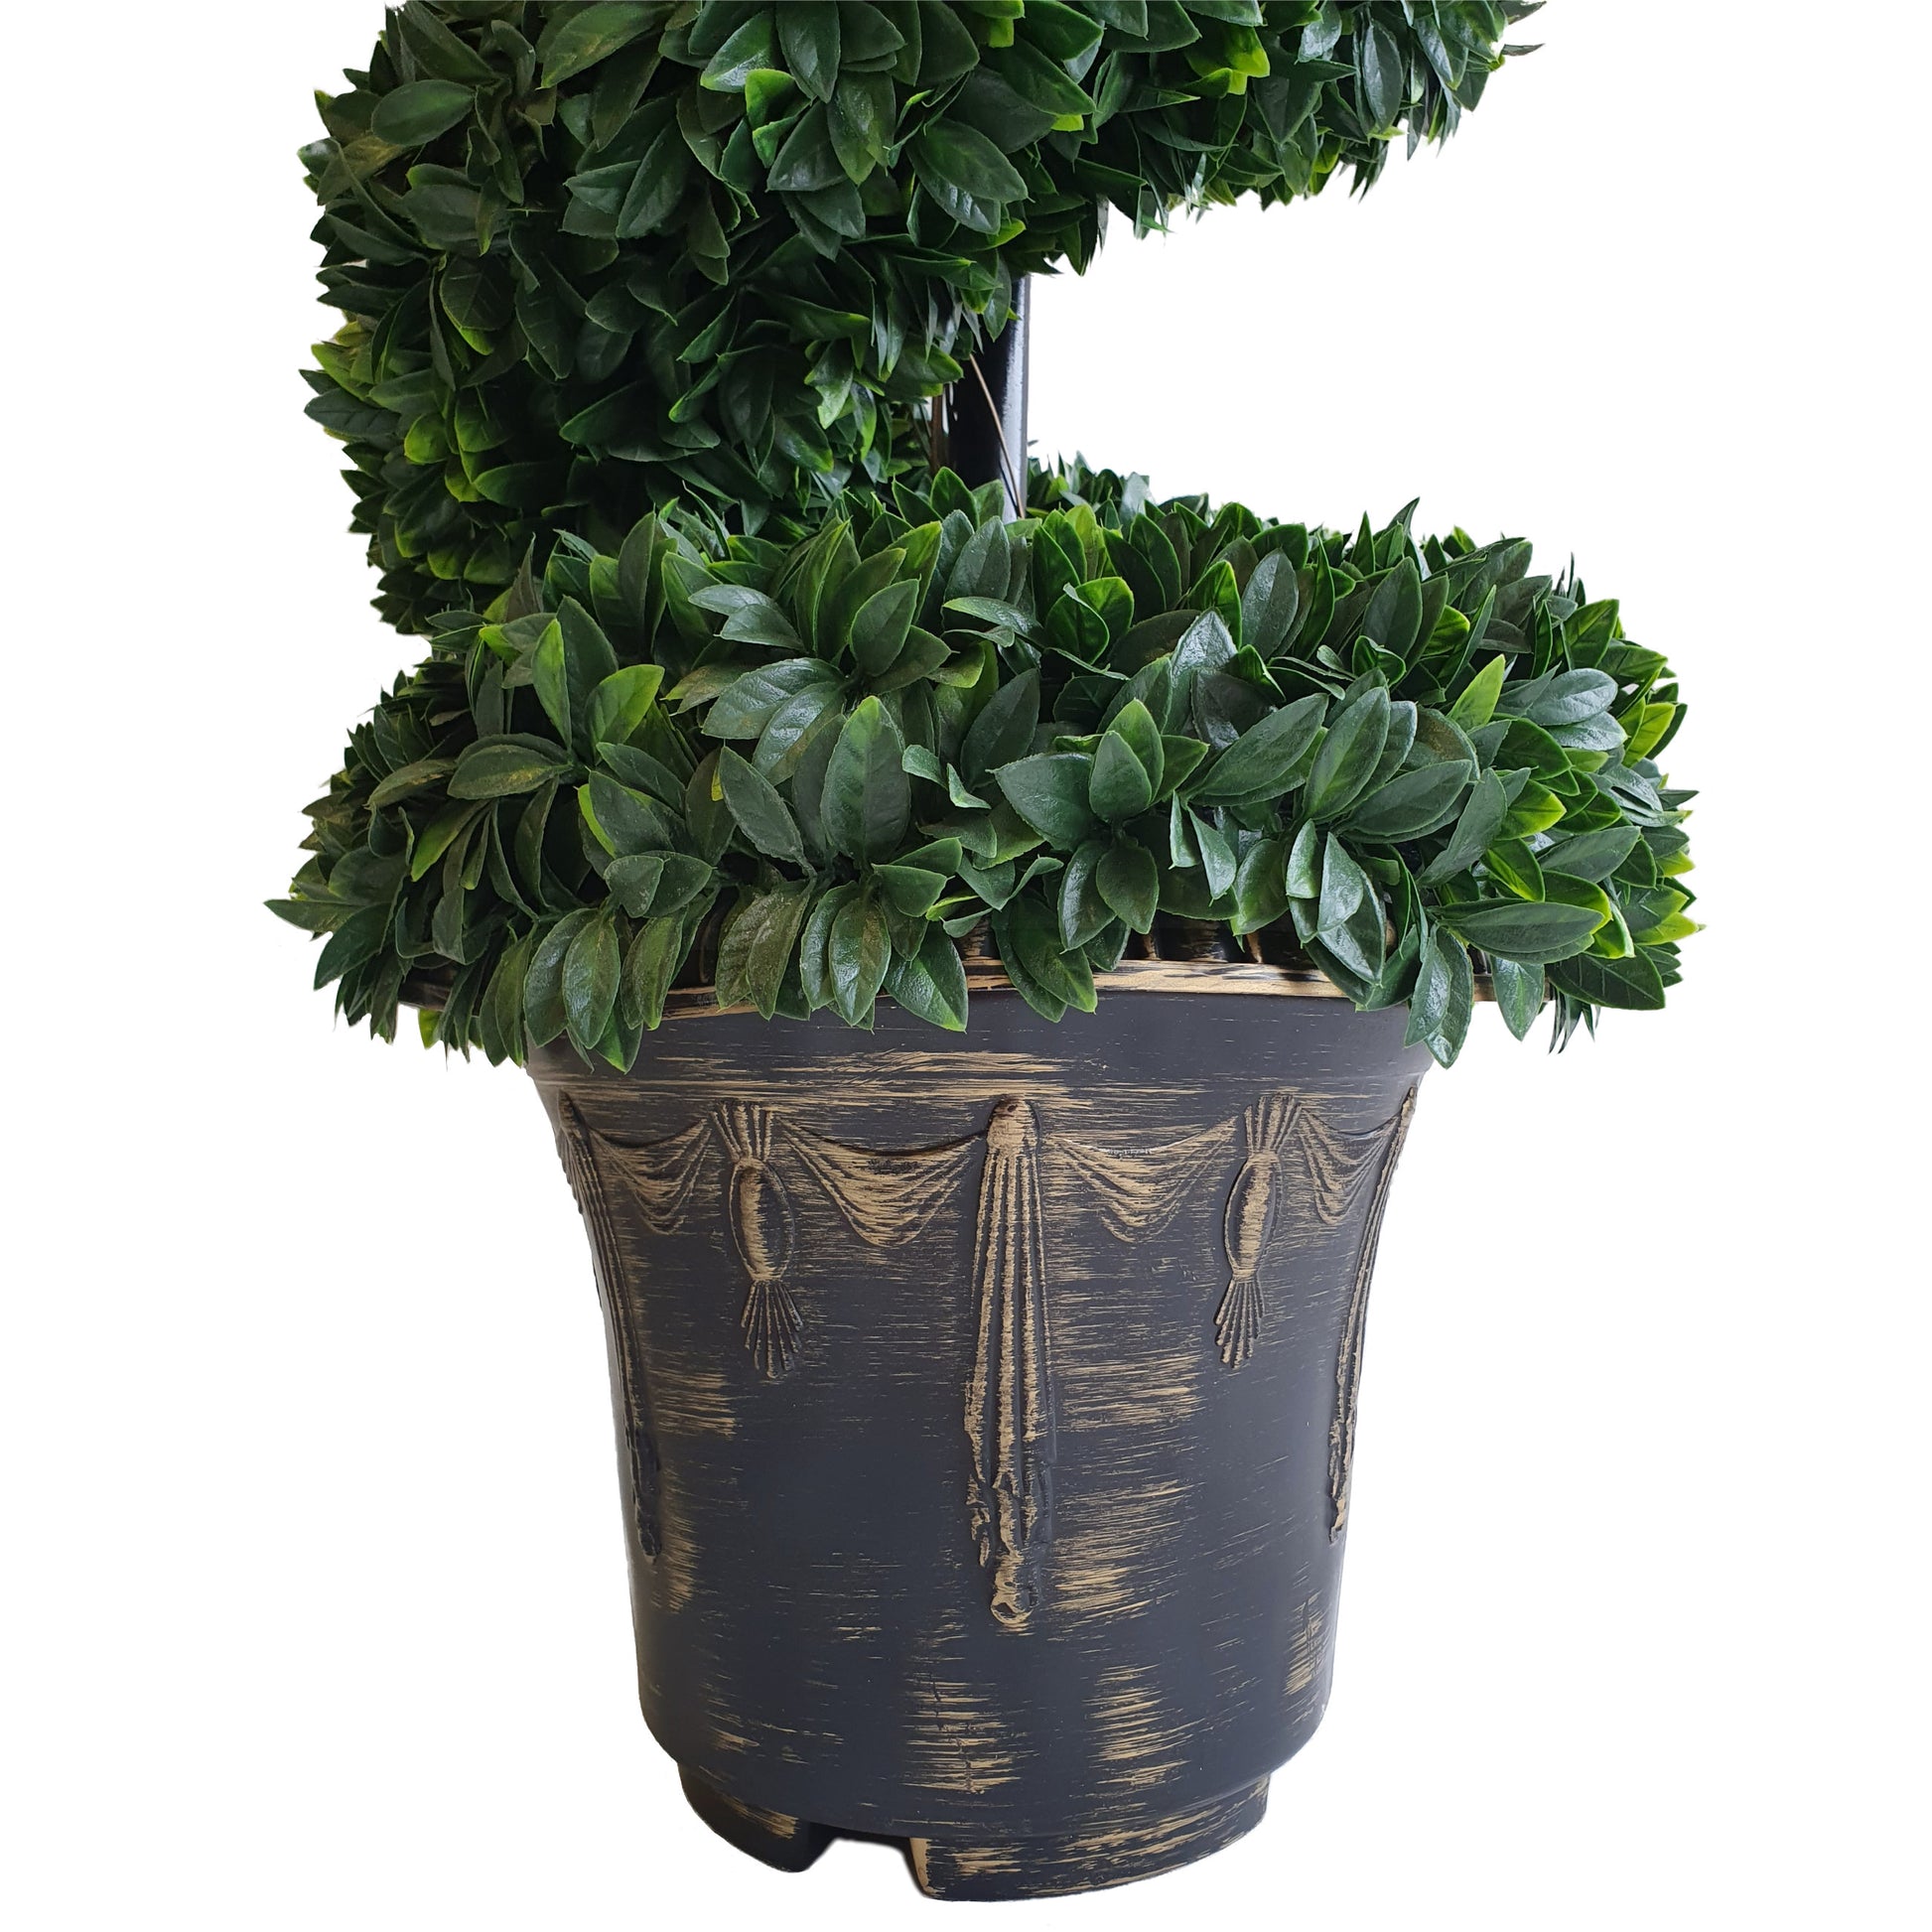 Pair of Spiral Large Leaf Boxwood Topiary Trees with Decorative Planter 90cm